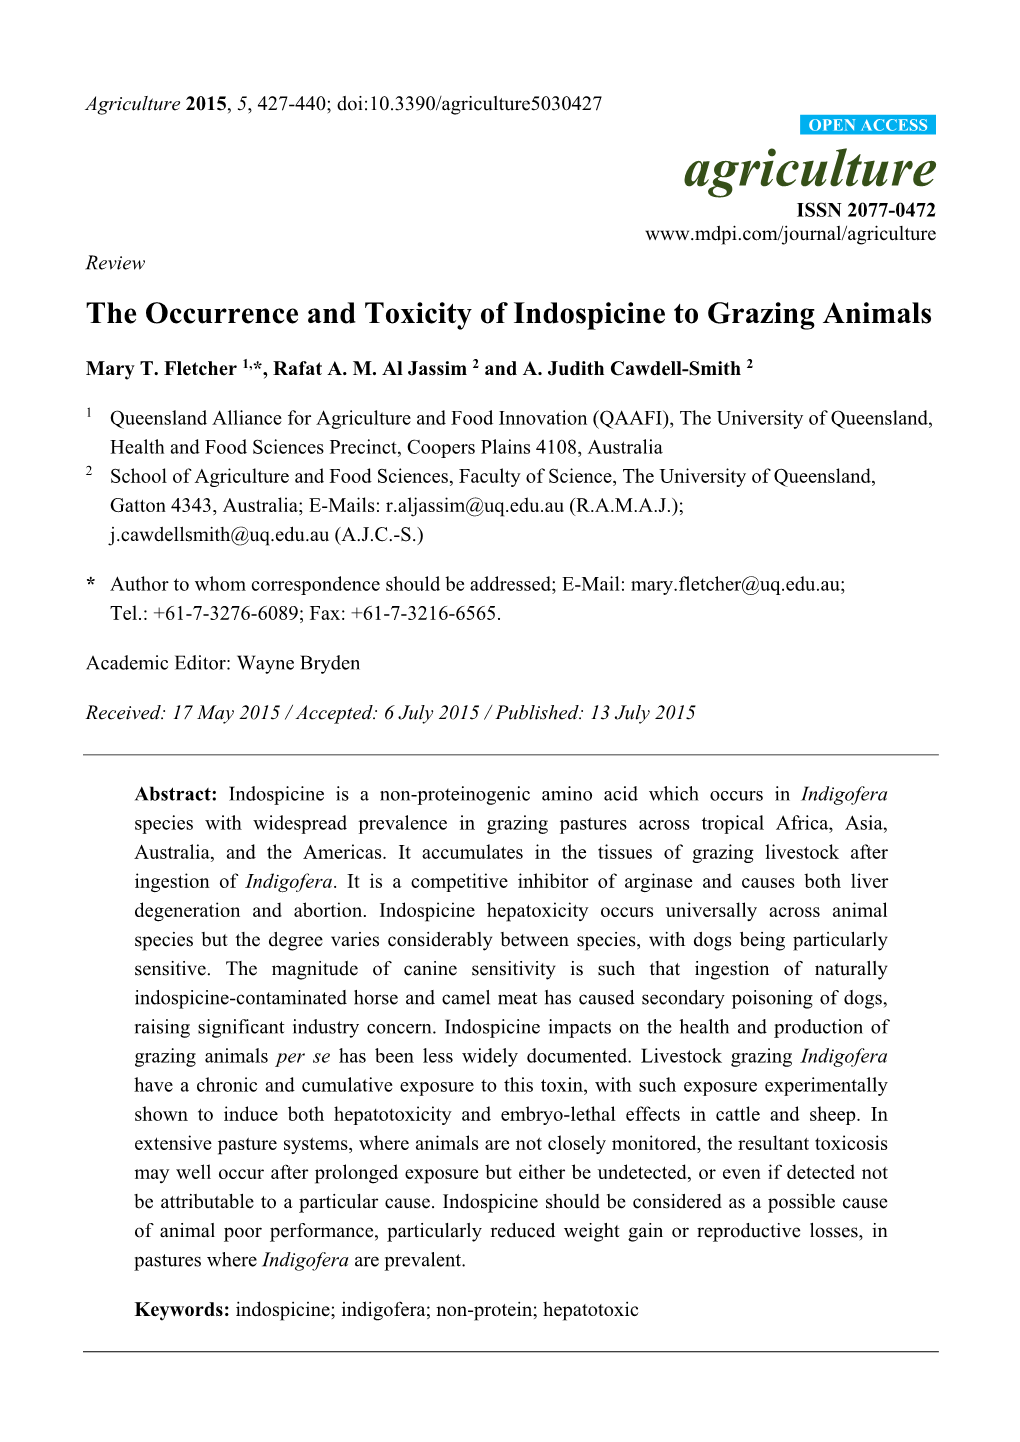 The Occurrence and Toxicity of Indospicine to Grazing Animals